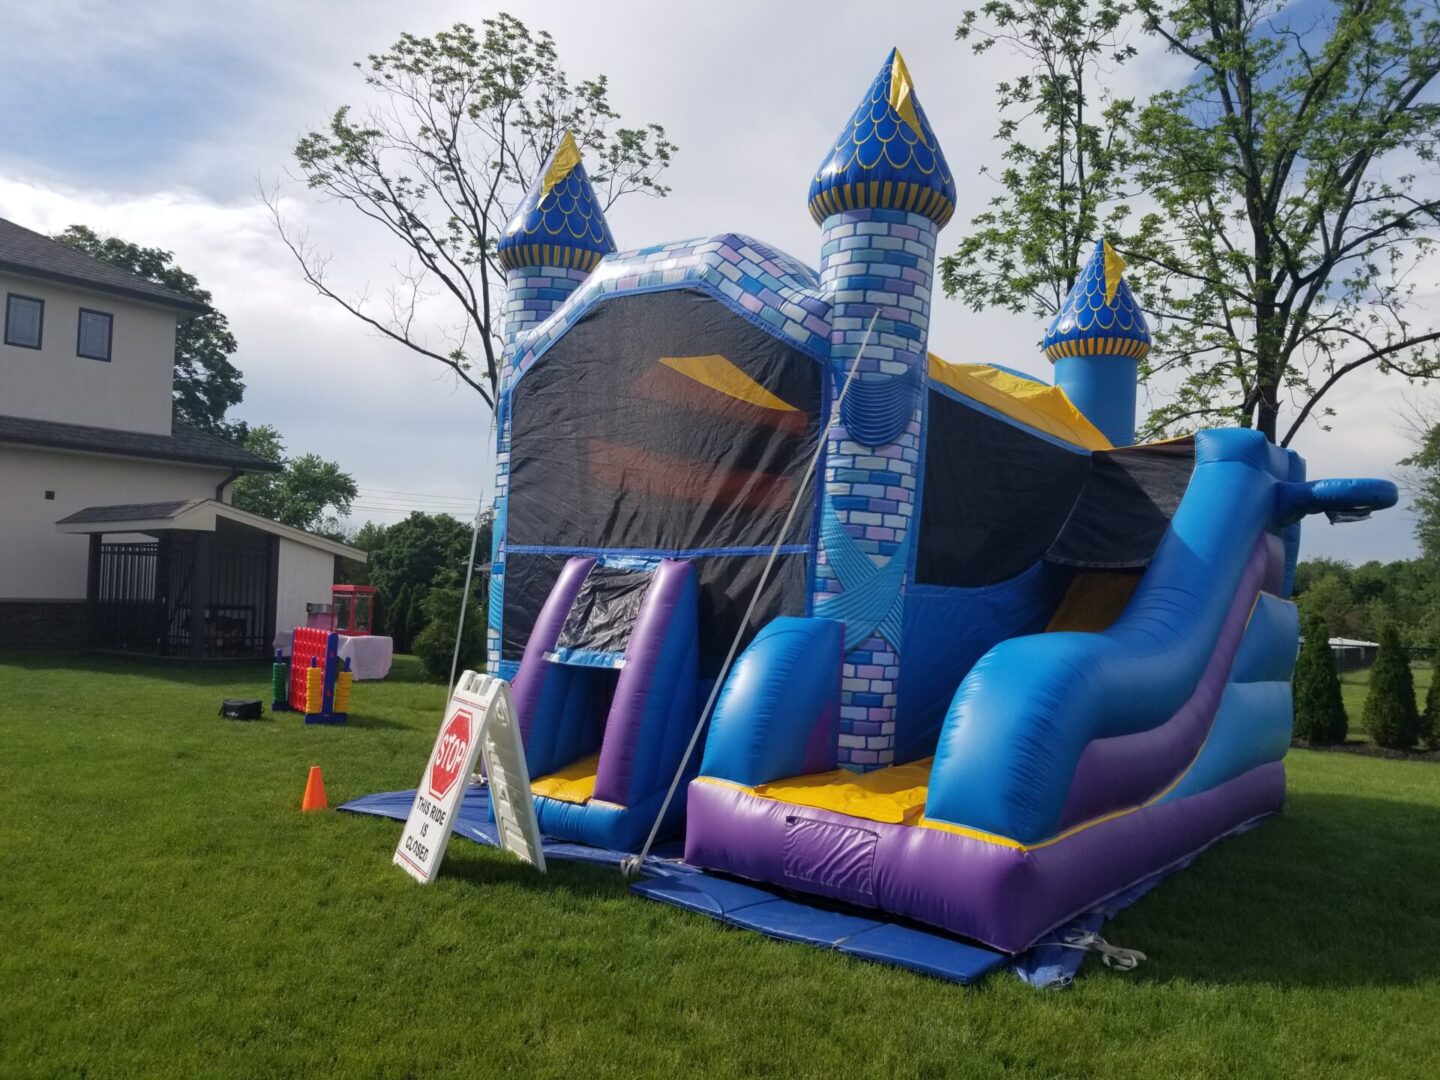 A bounce house with a castle and slide in the yard.